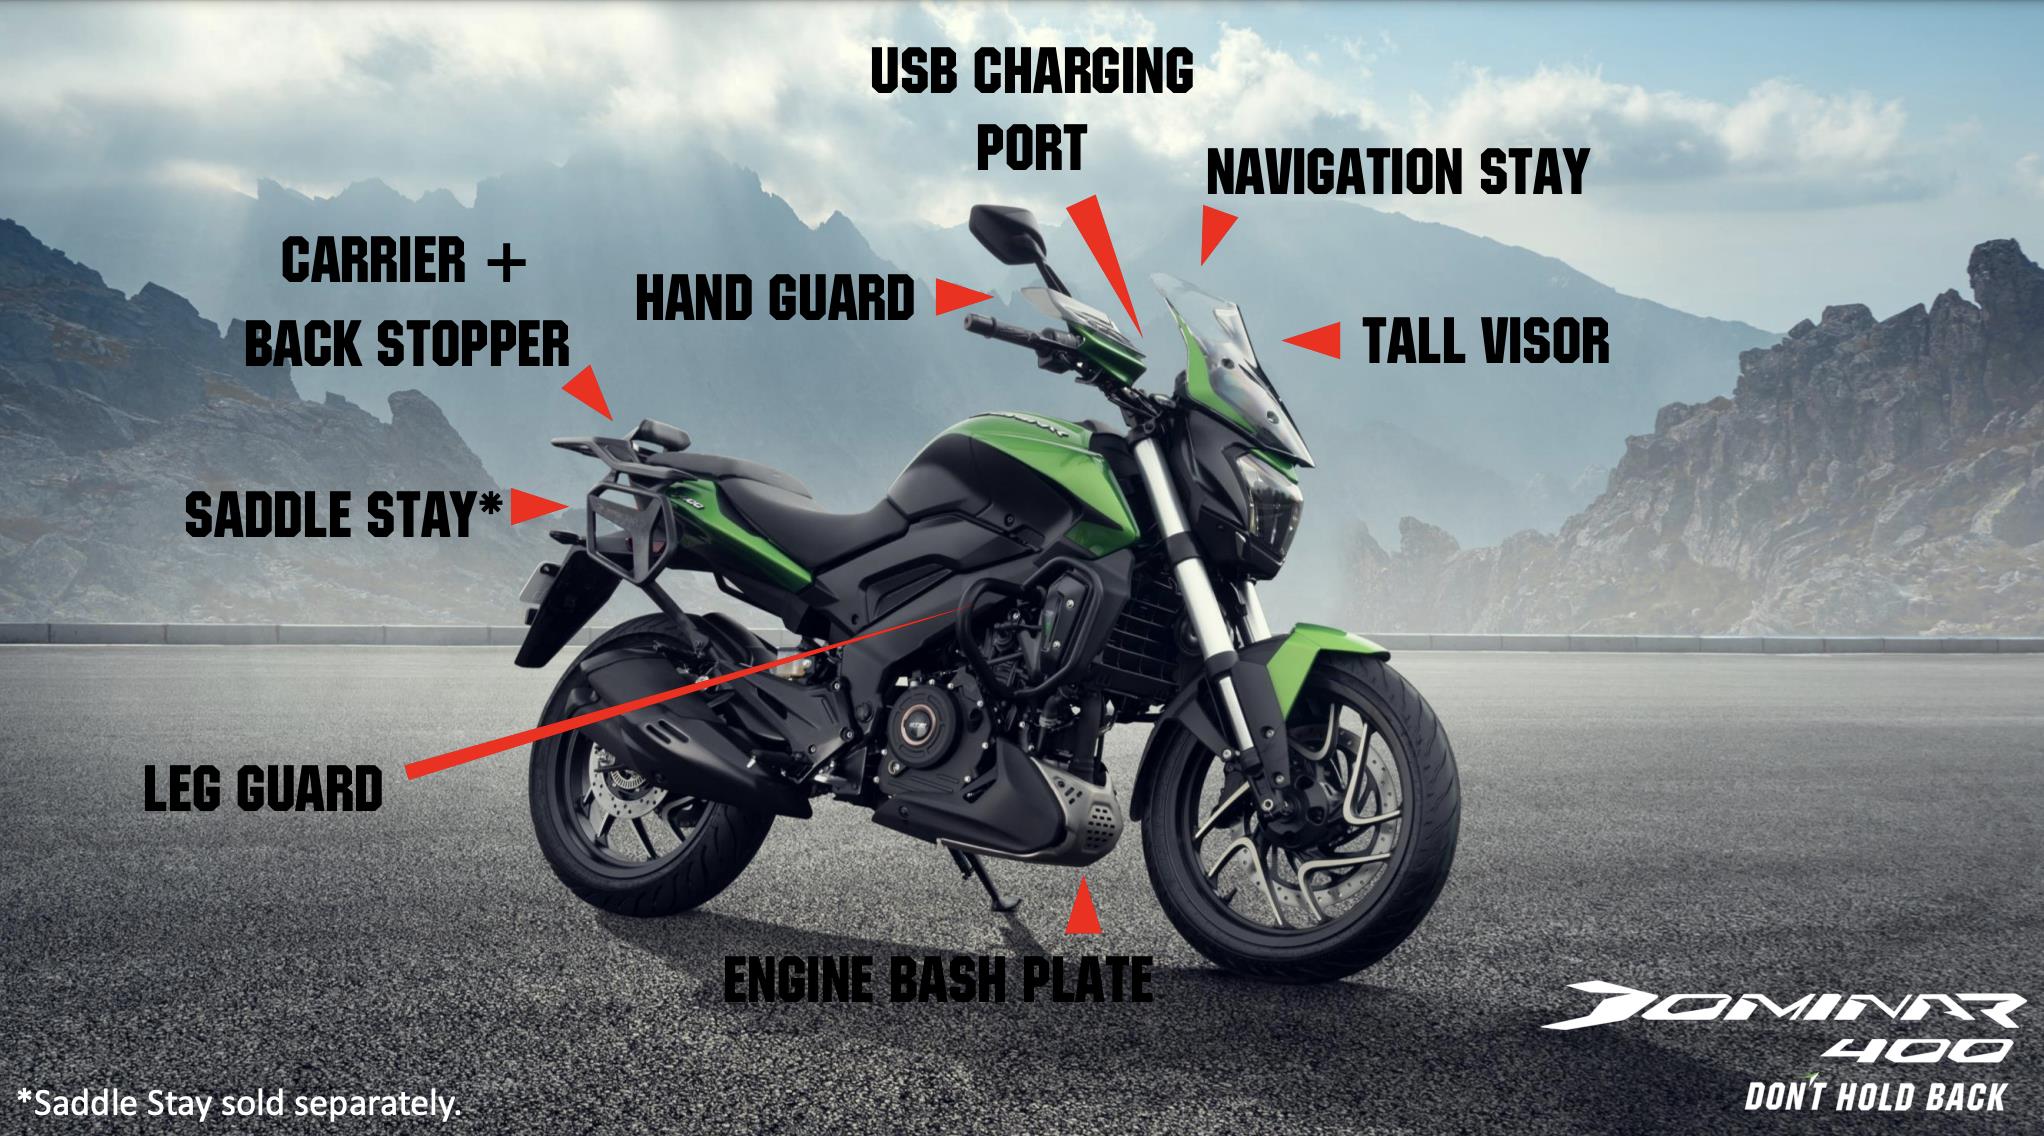 Bajaj Dominar 400 Clearance Sale - Now Available For Rs 1.99 Lakh